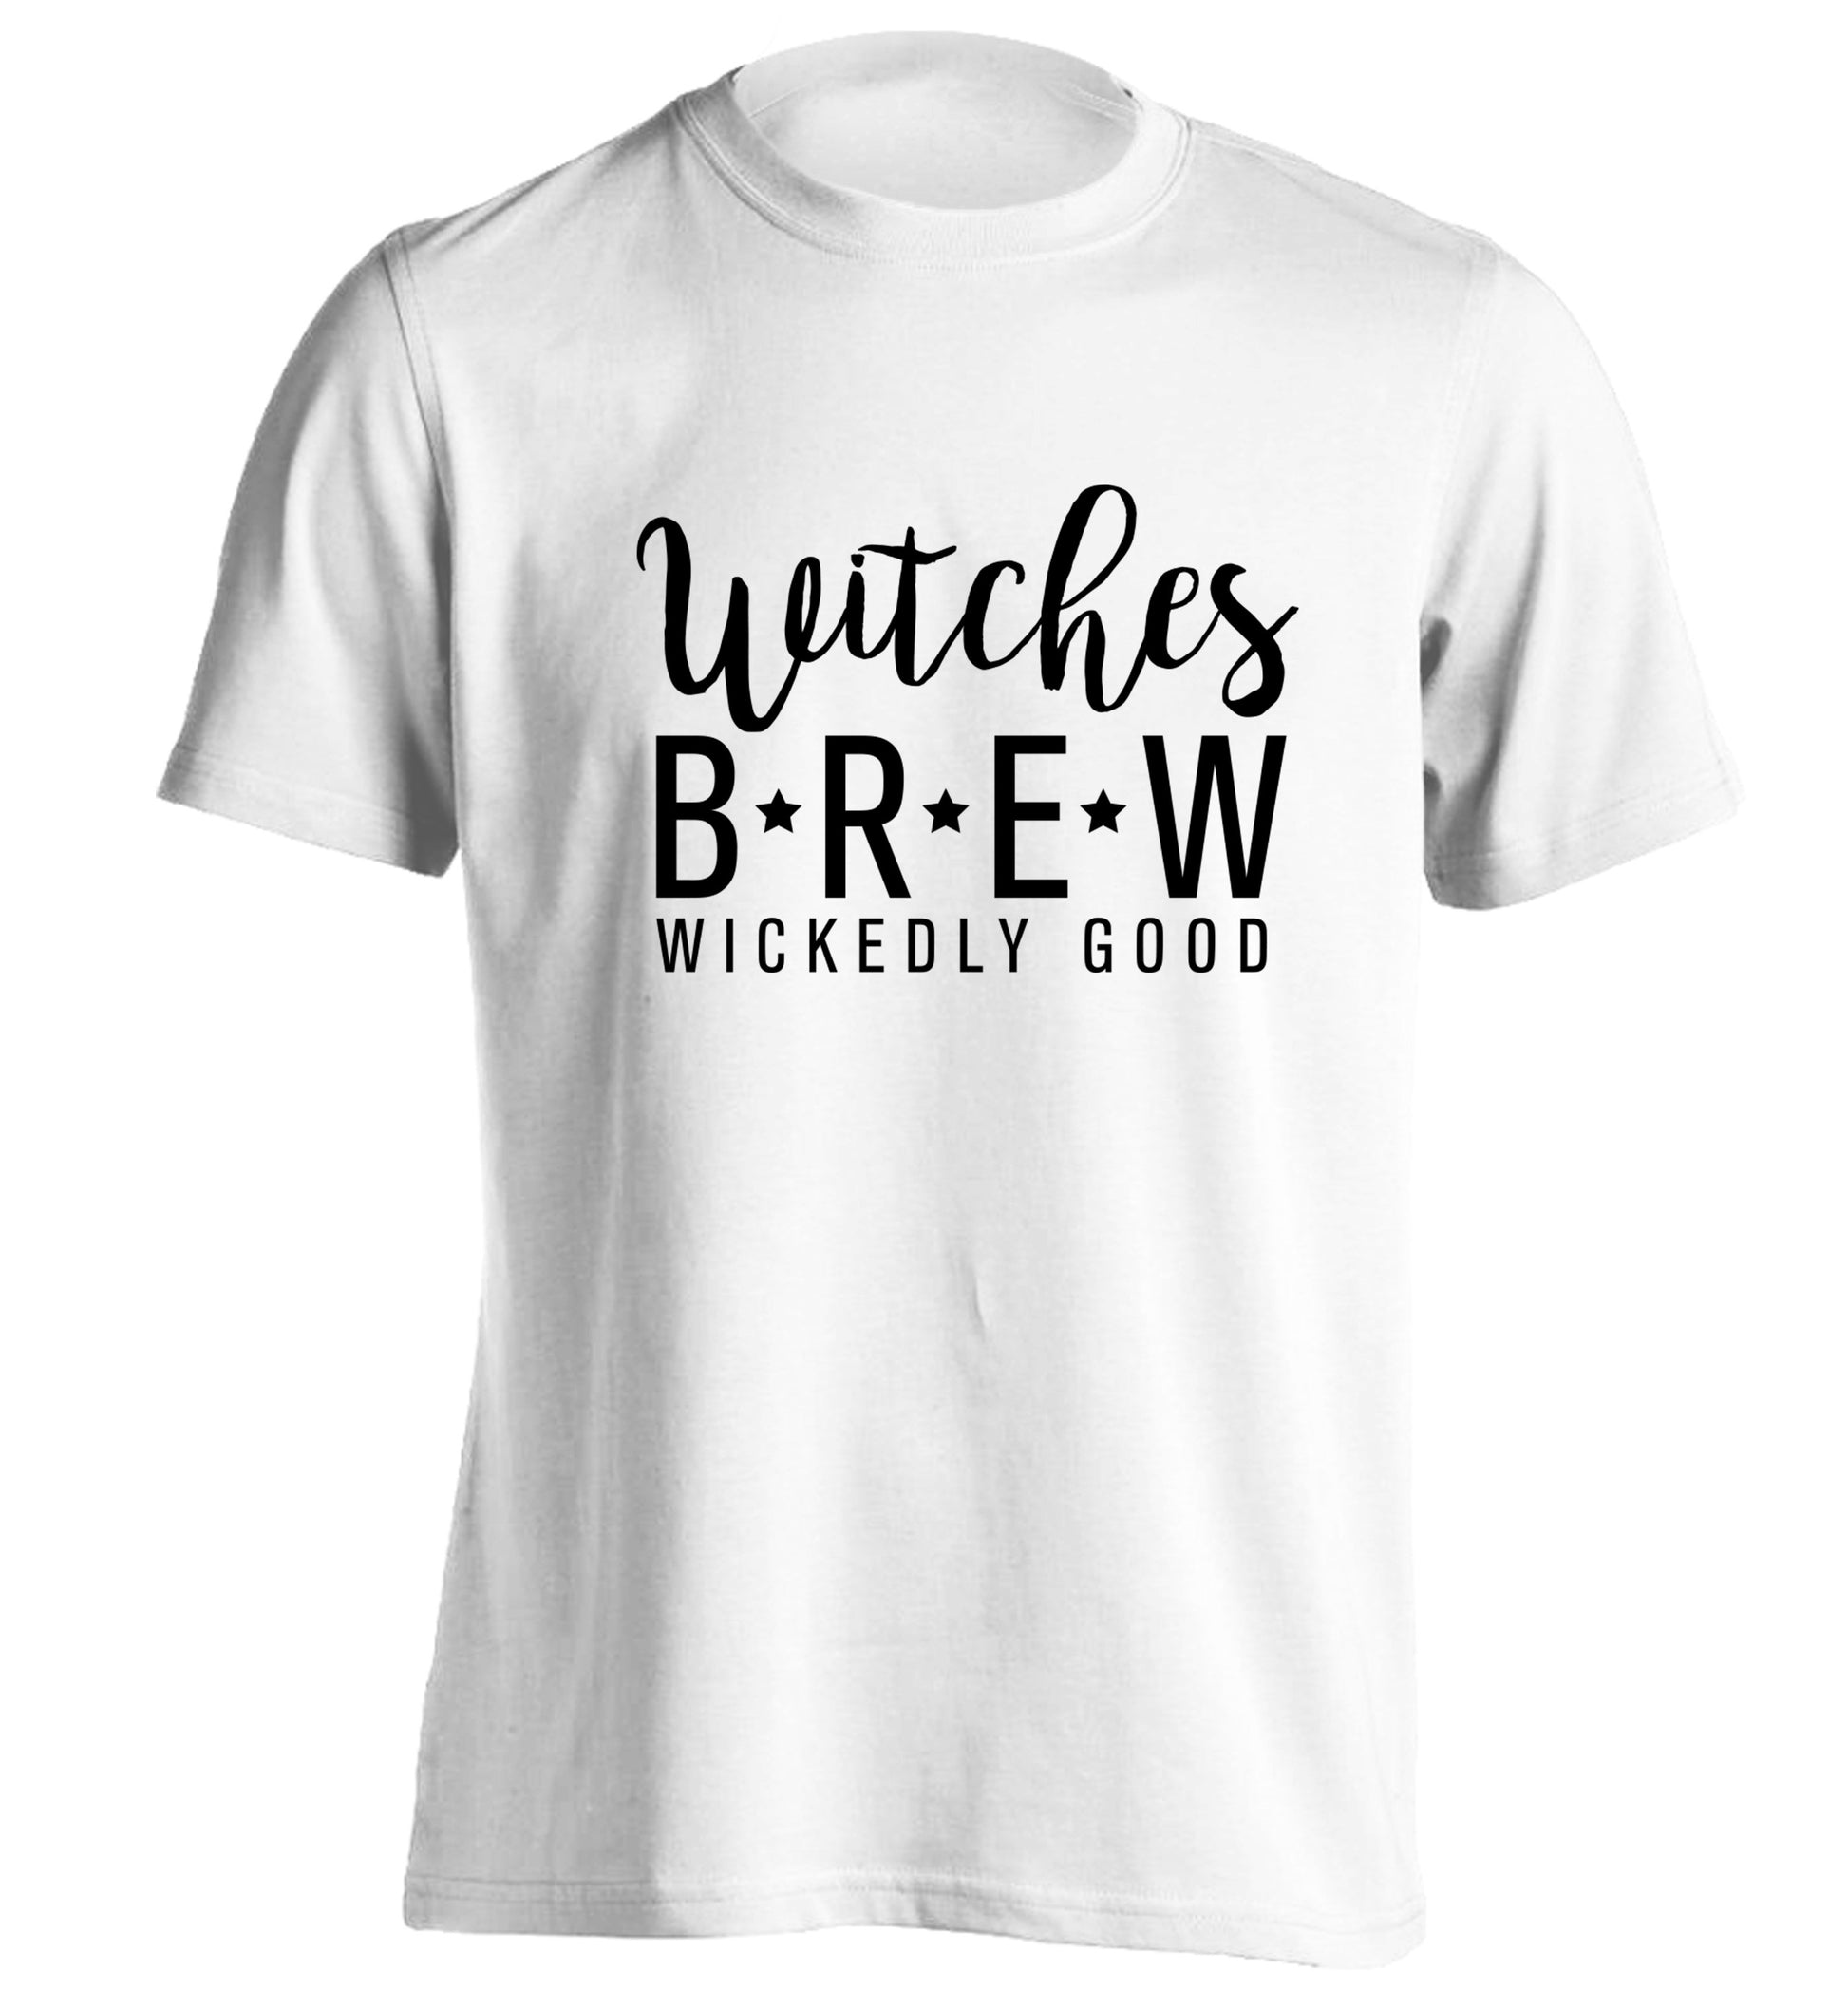 Witches Brew wickedly good adults unisex white Tshirt 2XL